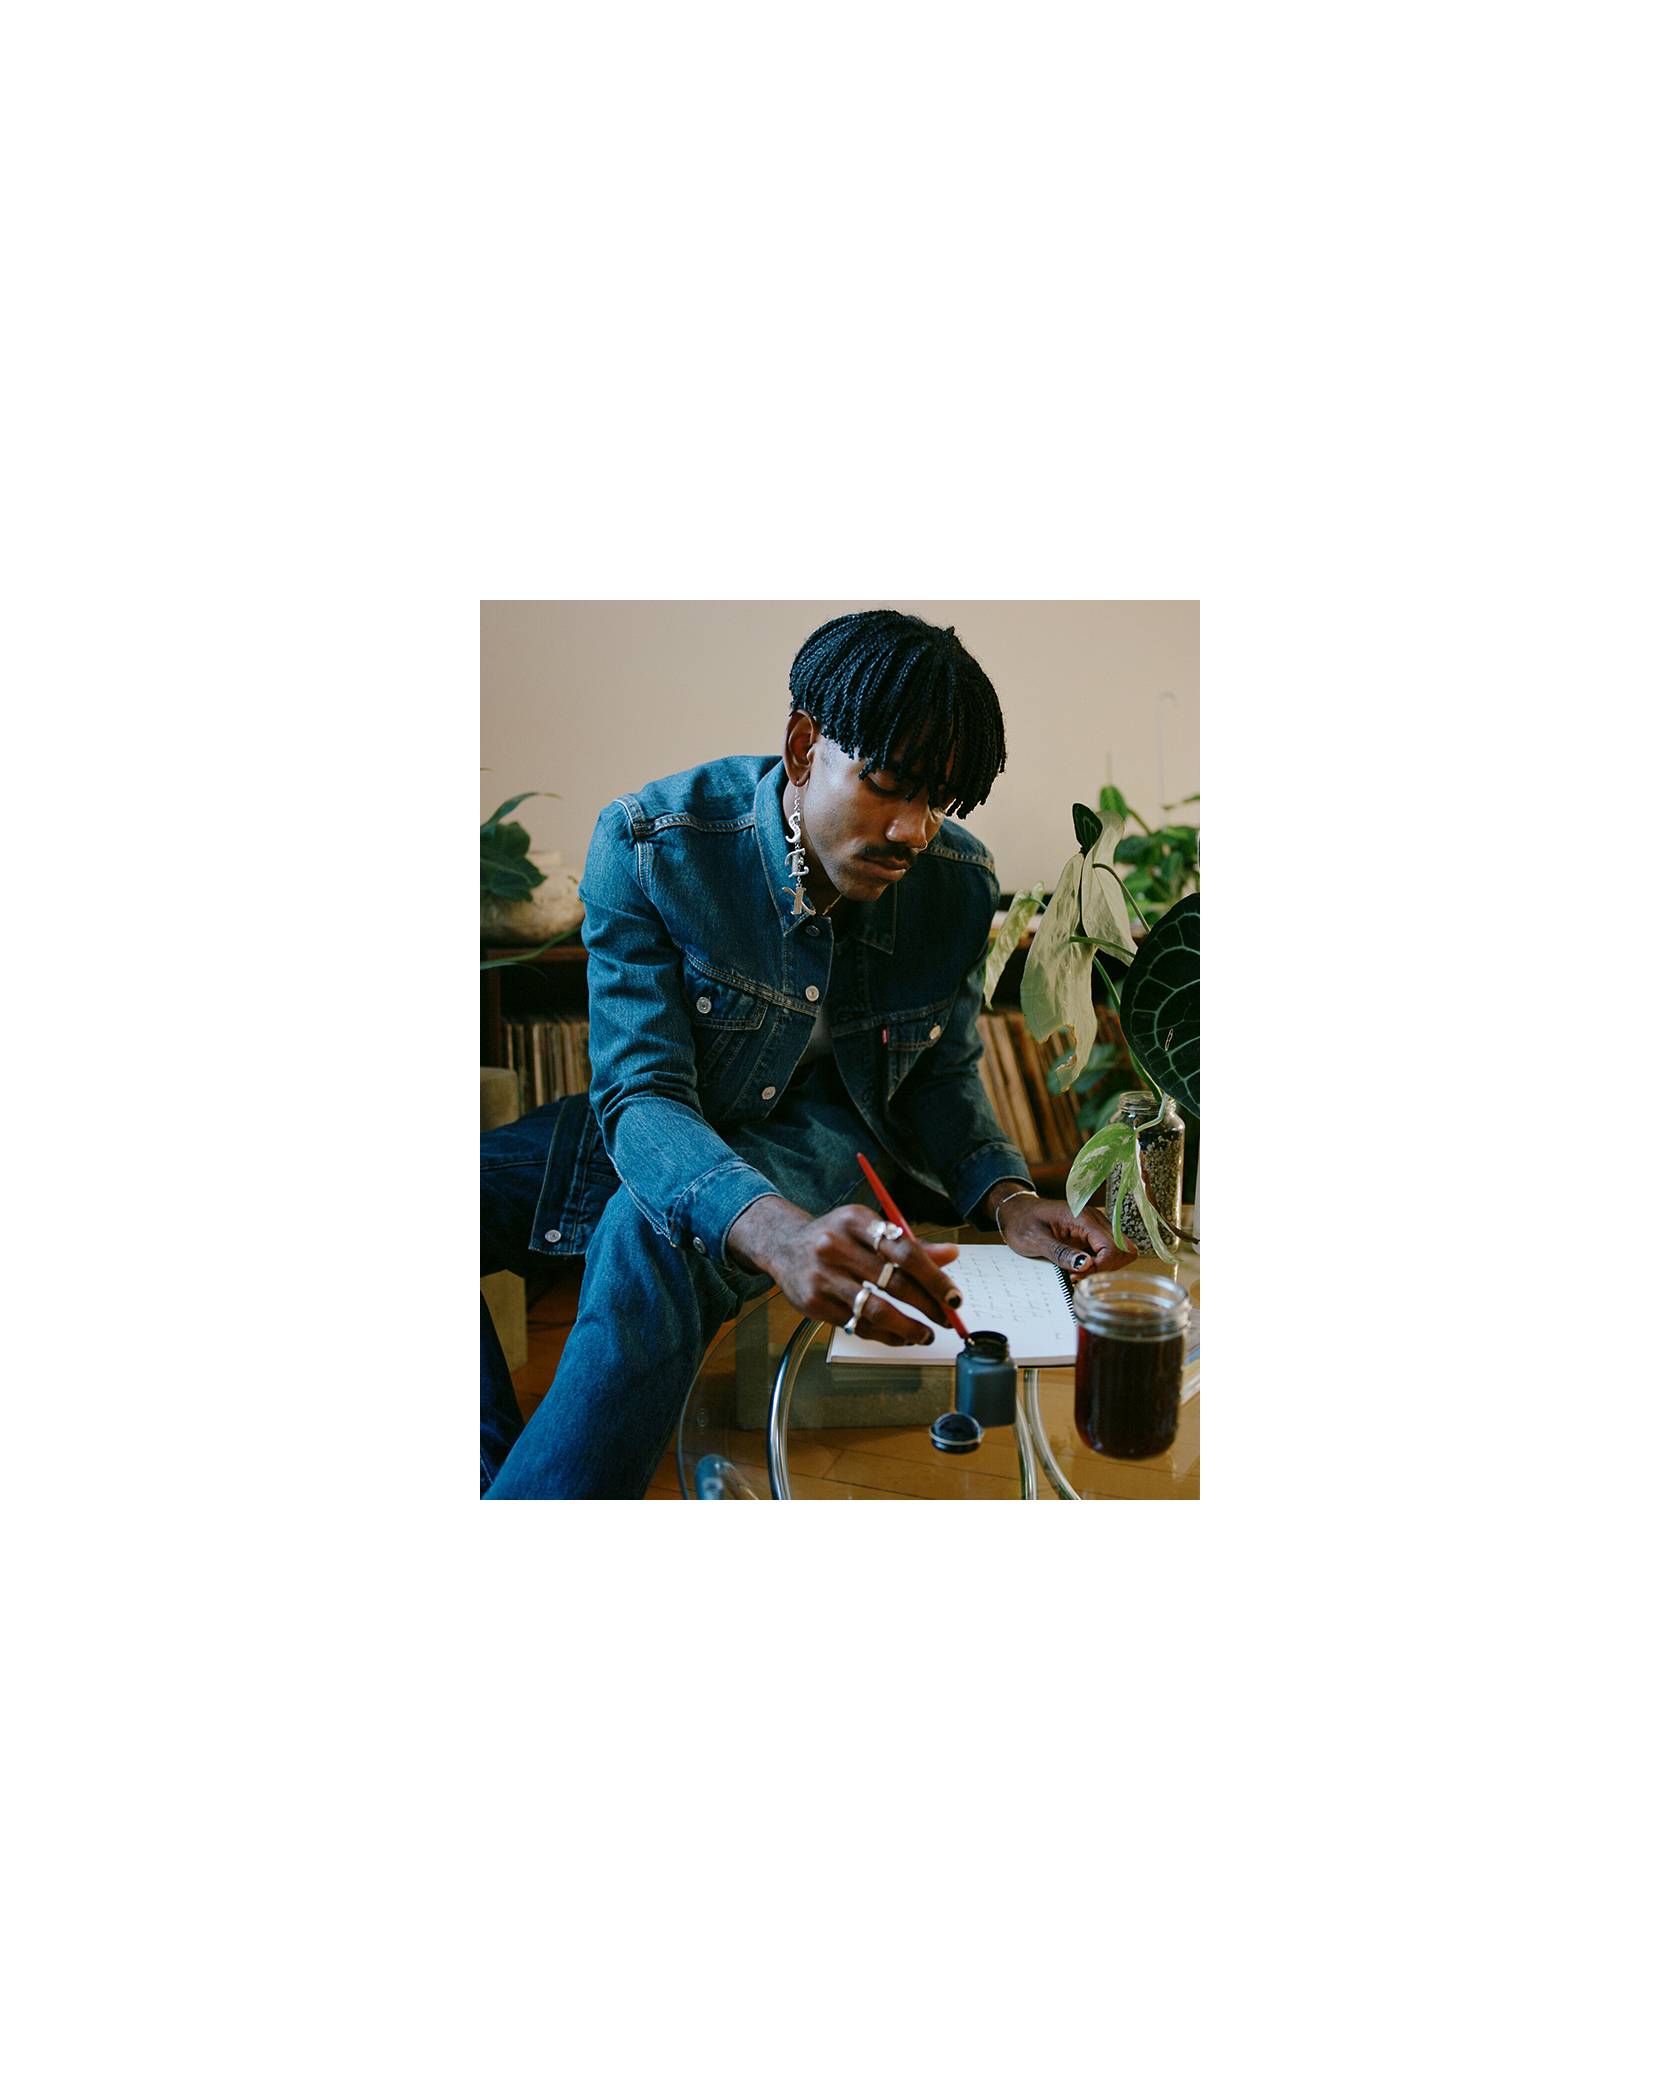 Photo of Jerrod La Rue in a Levi's Trucker Jacket and jeans writing in his notebook with a glass of iced coffee on the table.